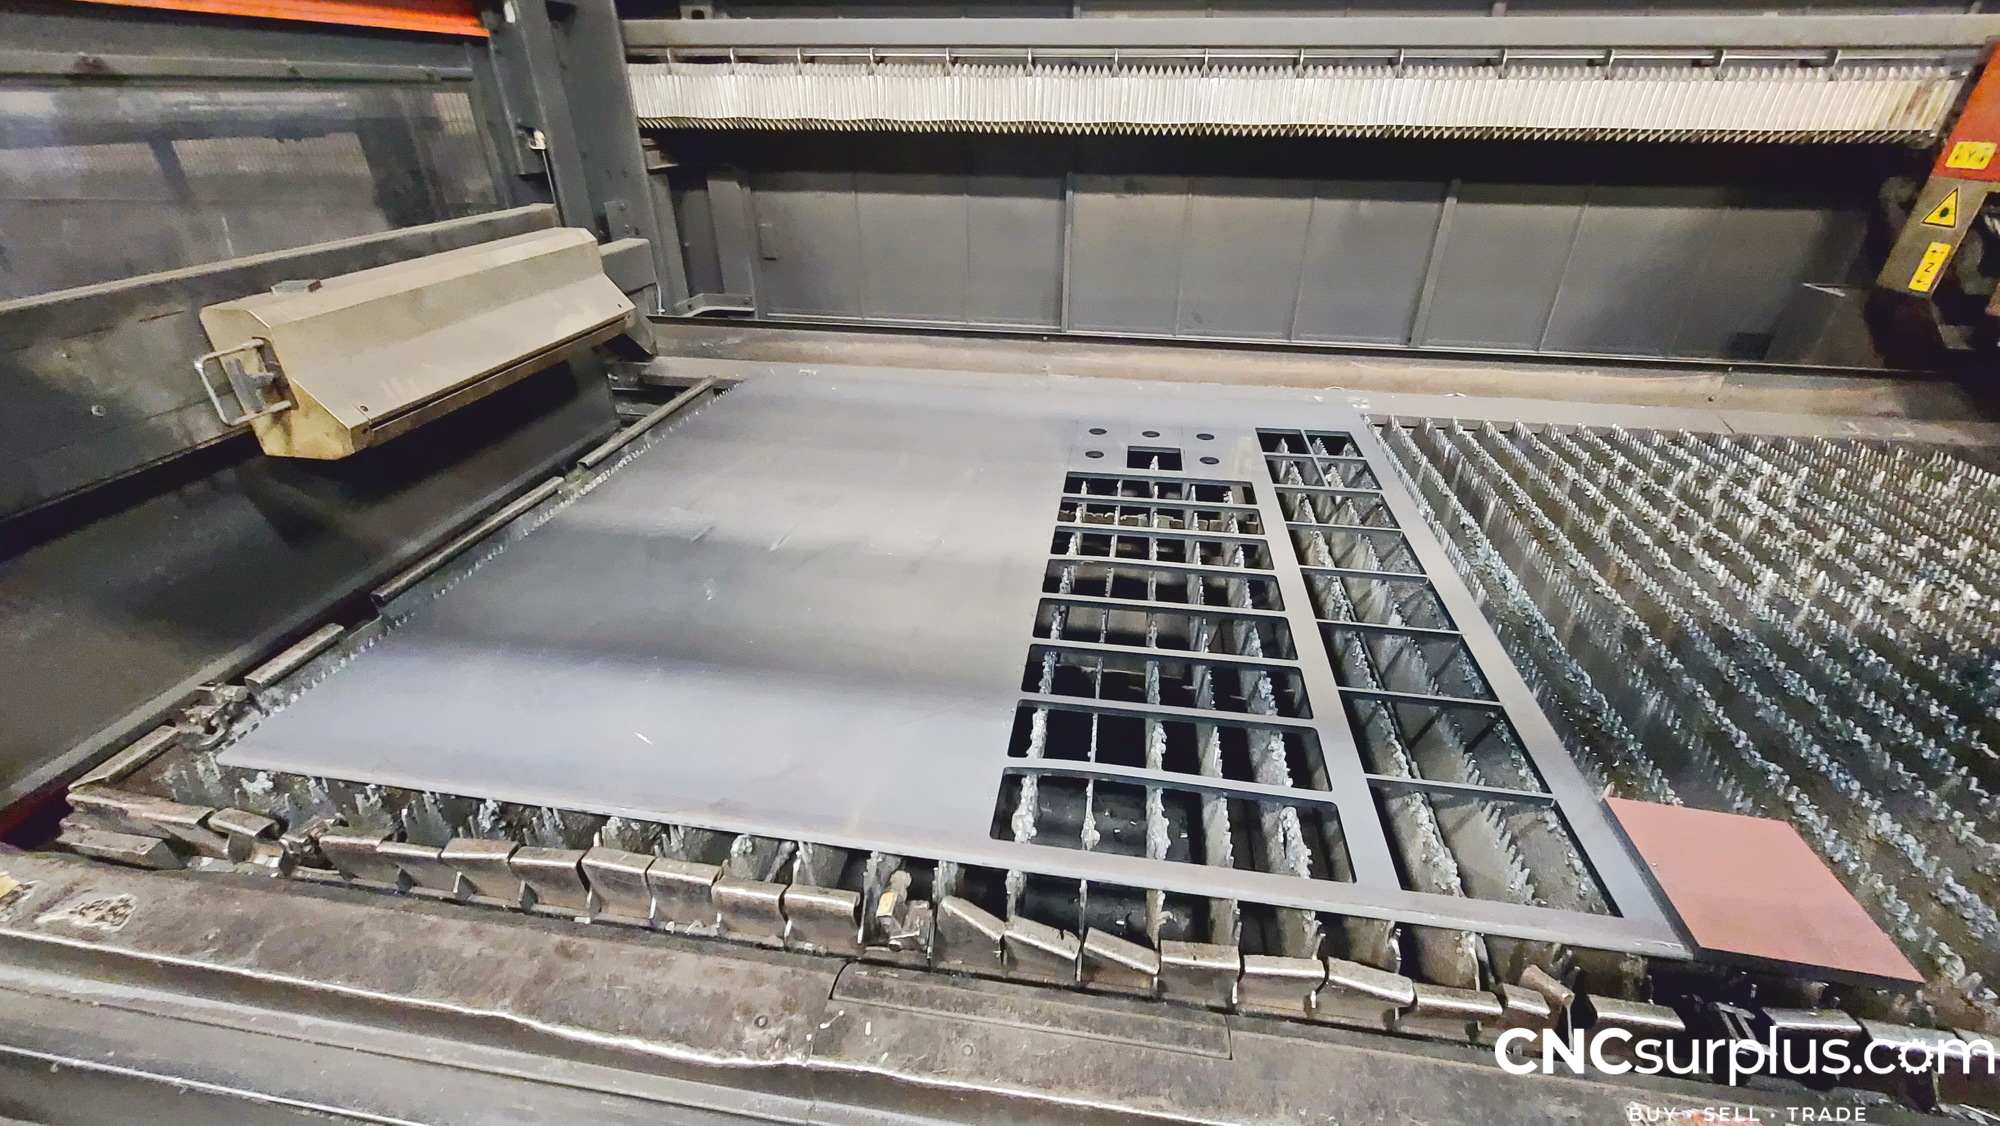 2011 AMADA FOM2-3015 NT Laser Cutters | CNCsurplus, A Div. of Comtex Leasing Corp.